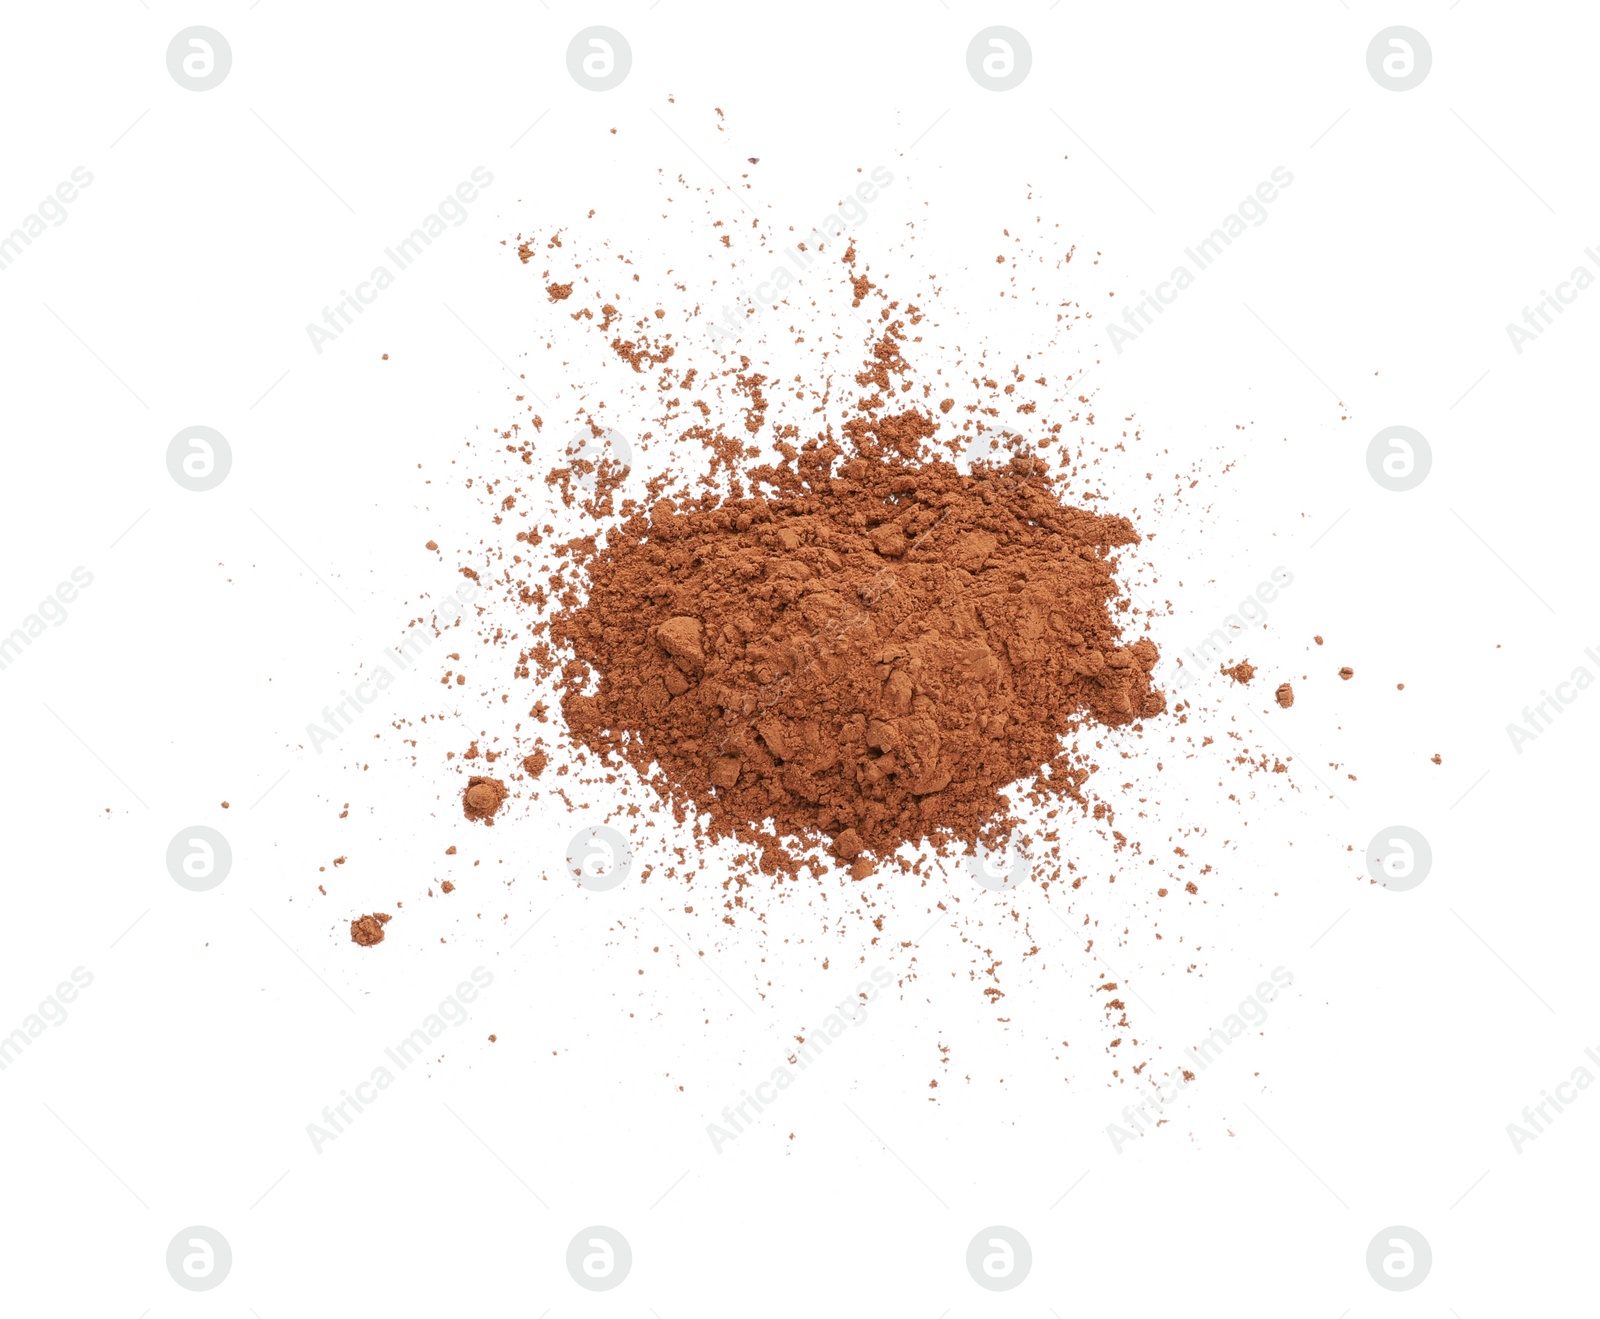 Photo of Pile of brown cocoa powder on white background